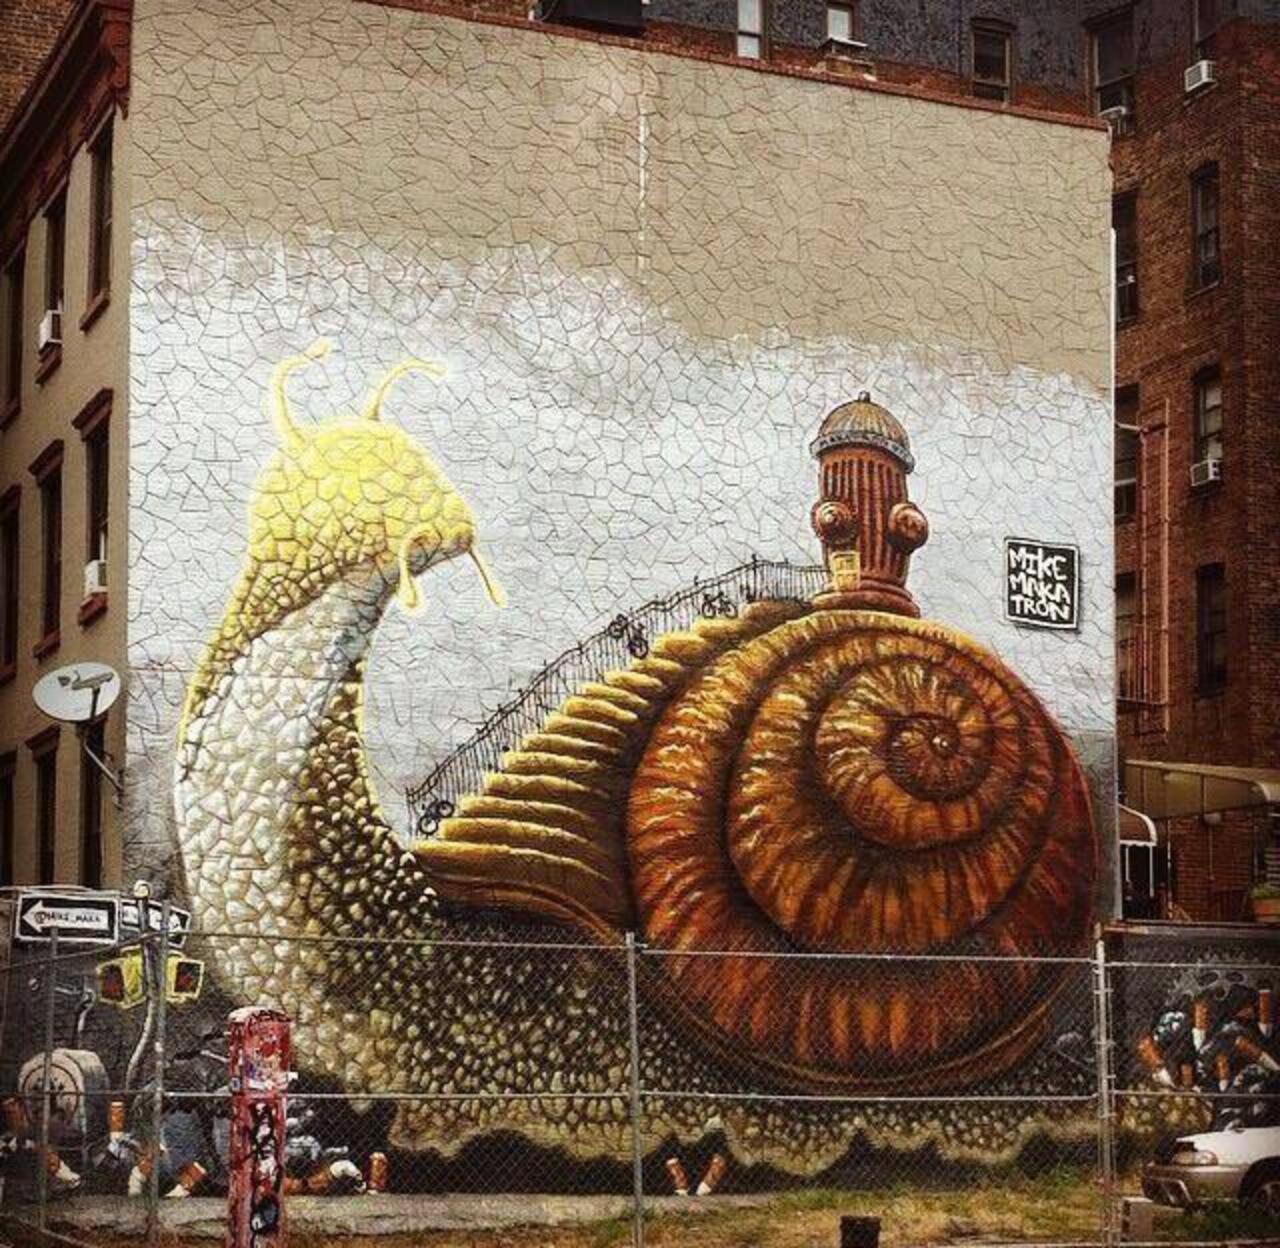 RT @designopinion: Artist Mike Makatron fantastic large scale Street Art located in Brooklyn, NY #art #graffiti #mural #streetart http://t.co/vpEqFw8O6h